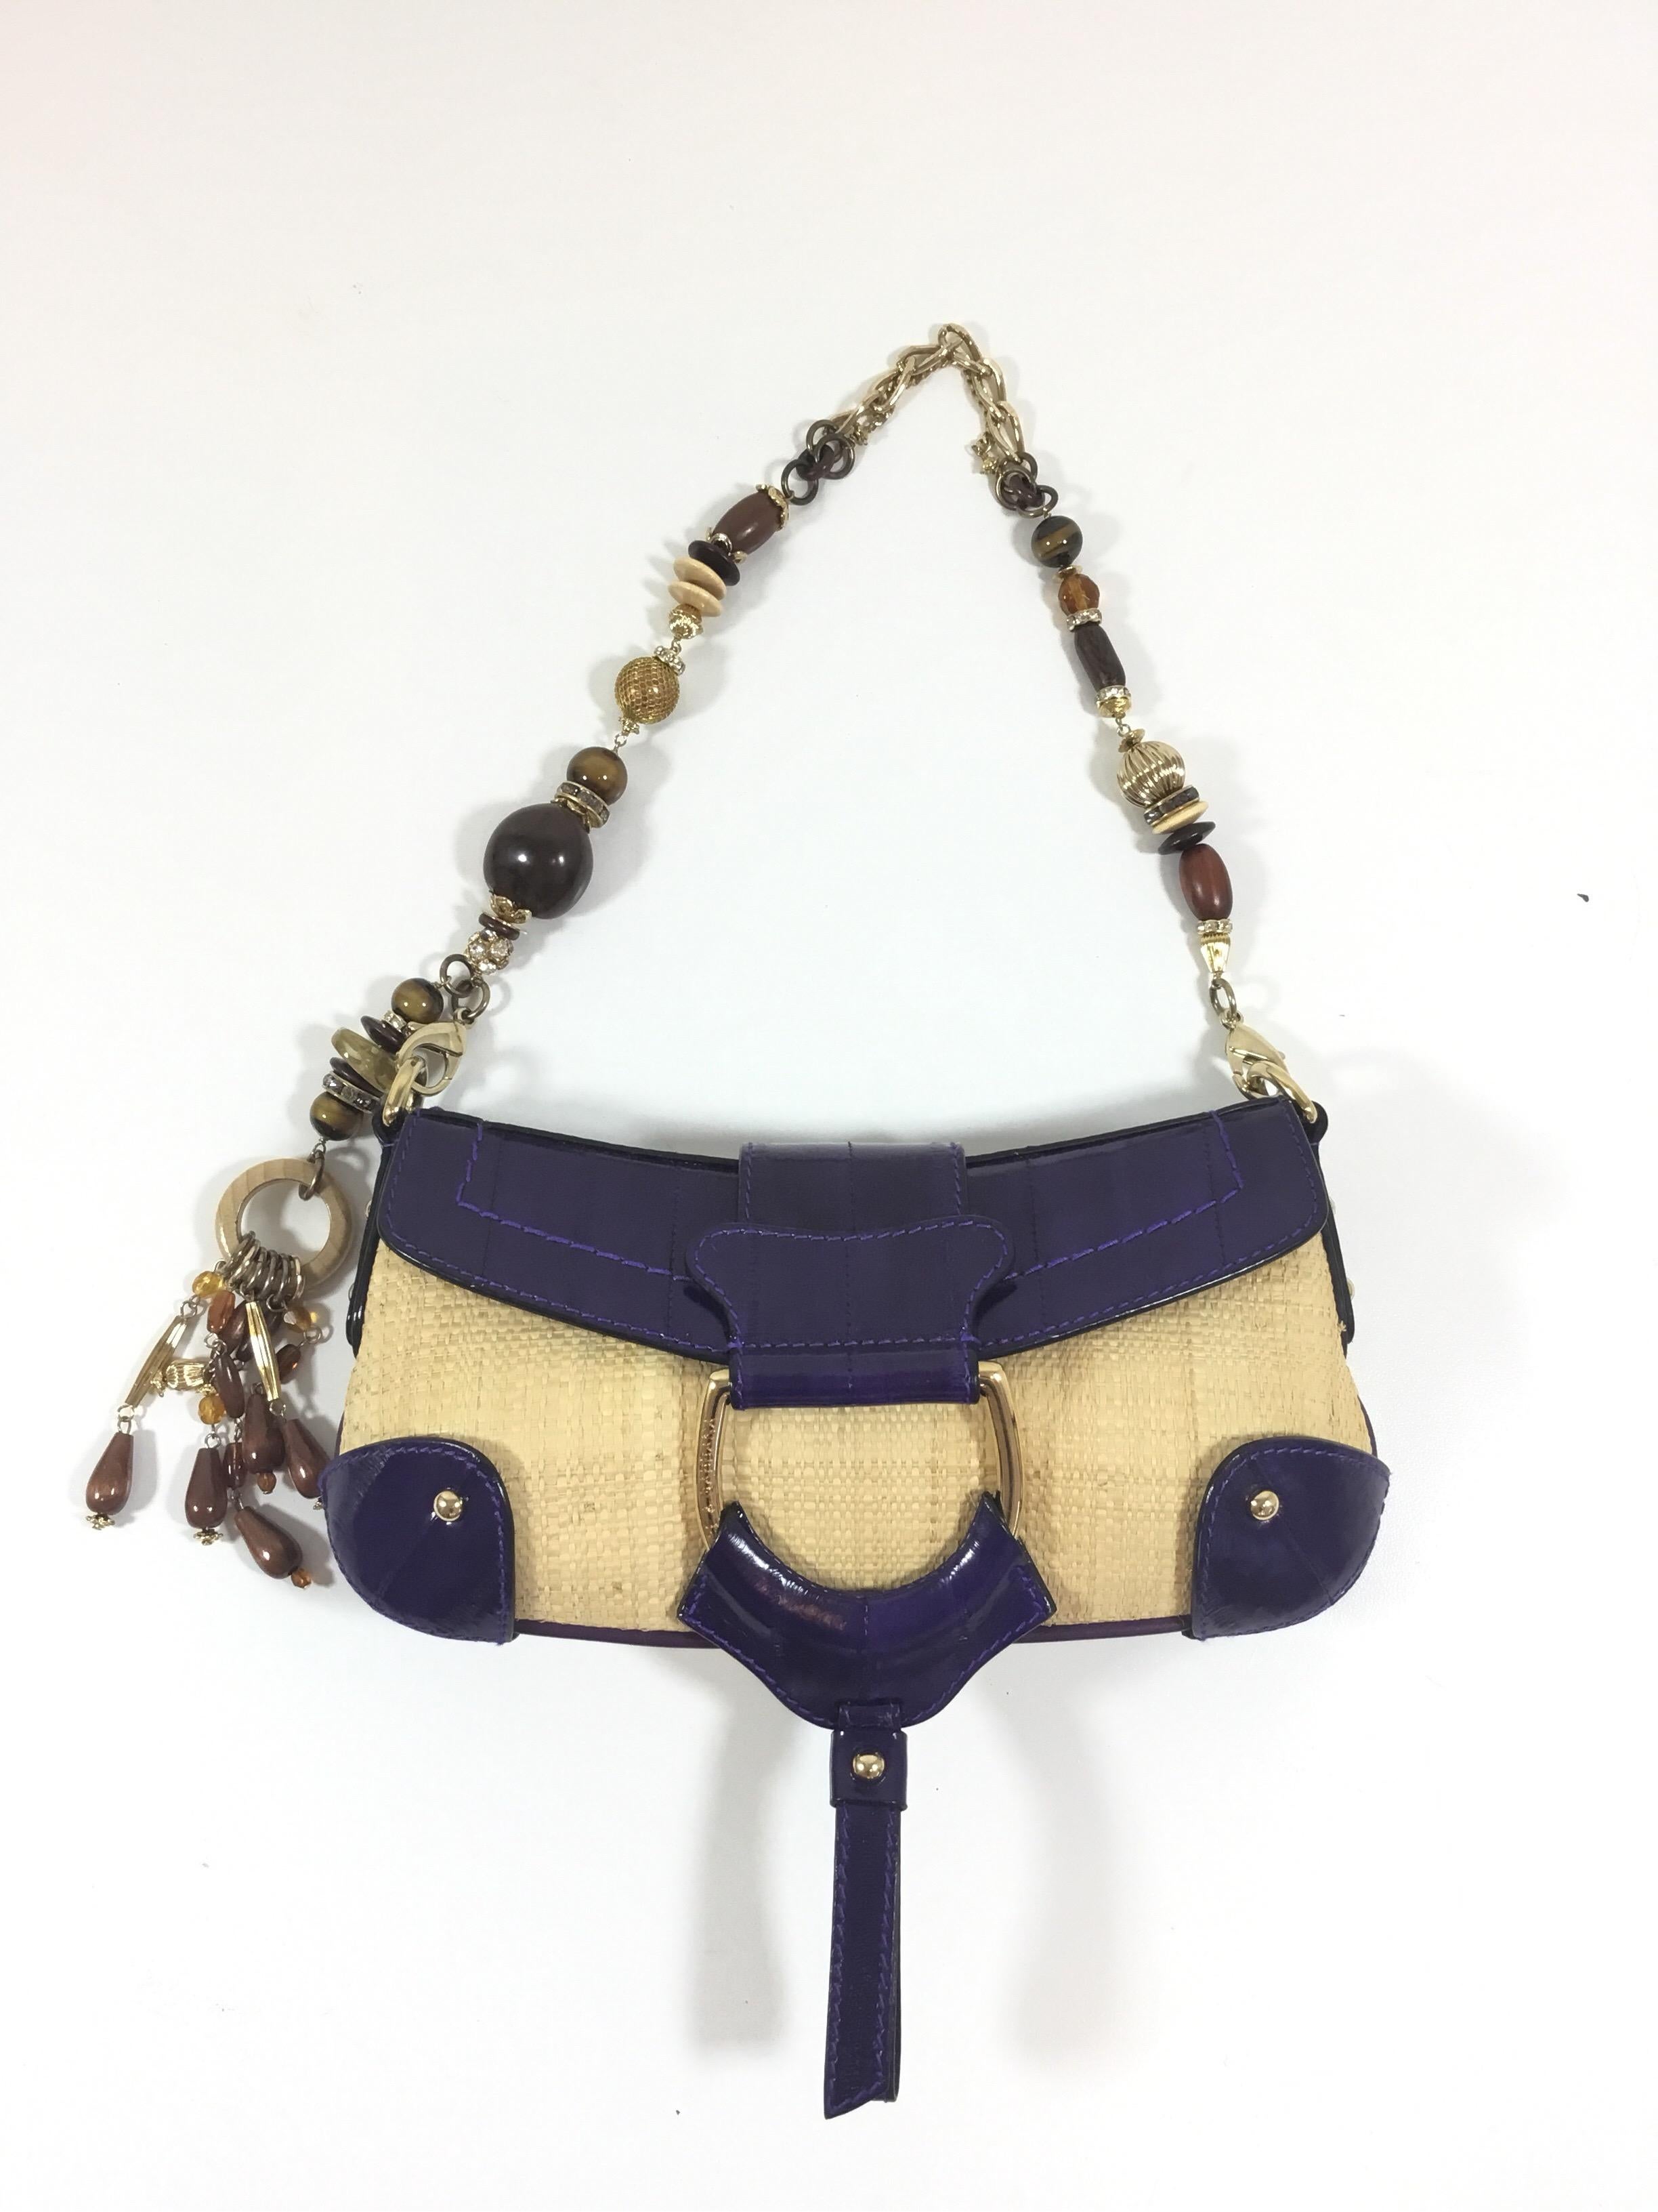 Dolce & Gabbana purse featured in straw and eel skin in purple with a bead and jewel gold chain handle, handle has clips at each end for easy removal, flap and snap stud closure. Interior is fully lined in a jacquard fabric with one slip pocket.